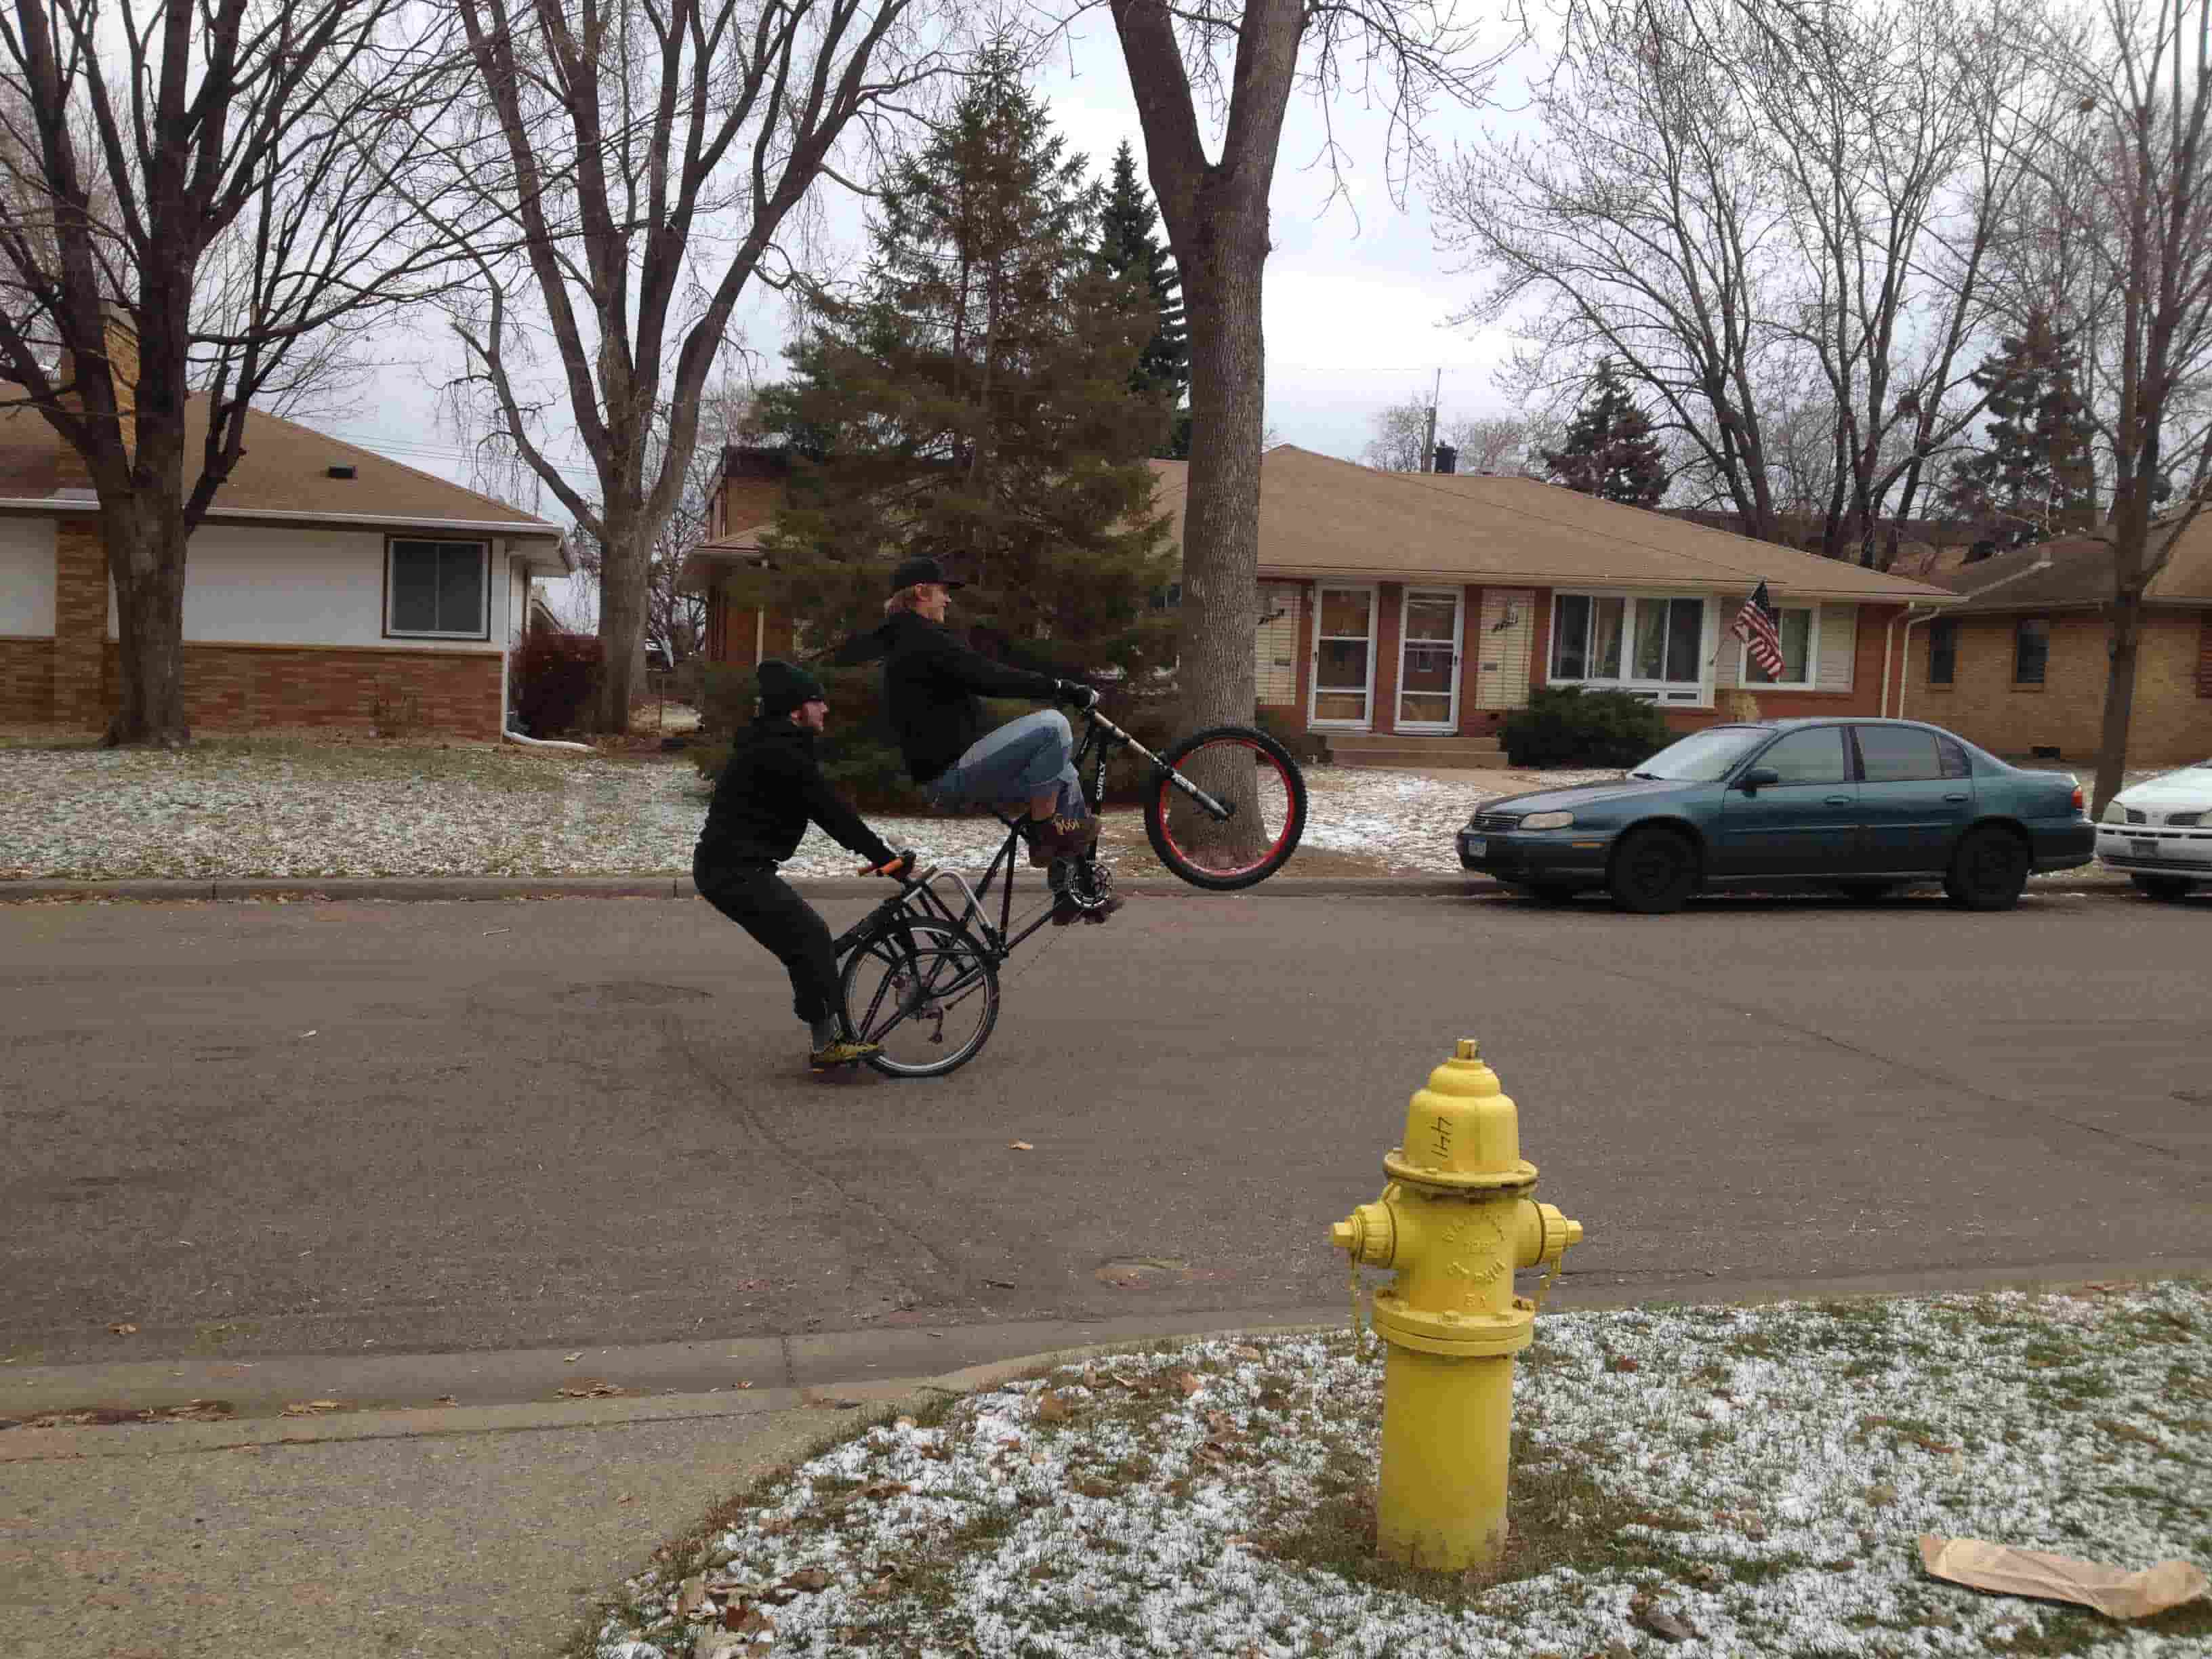 Right side view of a cyclist riding a wheelie on a black Surly Big Dummy bike with a person on back, on a paved street